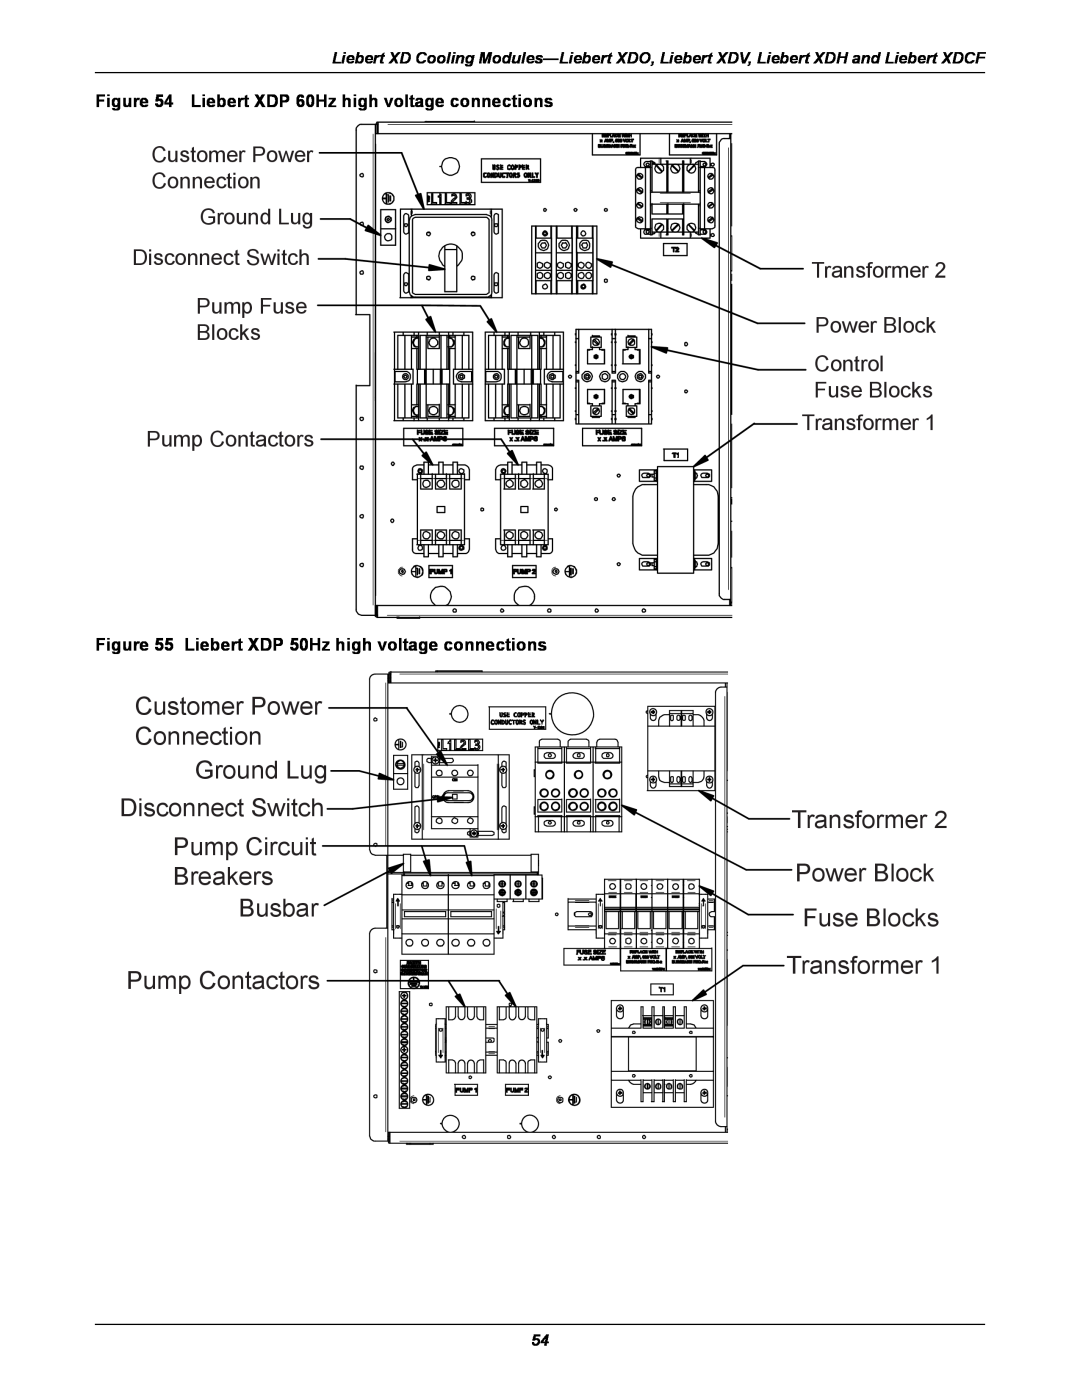 Emerson Xtreme Density manual Customer Power, Connection, Ground Lug, Disconnect Switch, Pump Circuit, Breakers, Busbar 